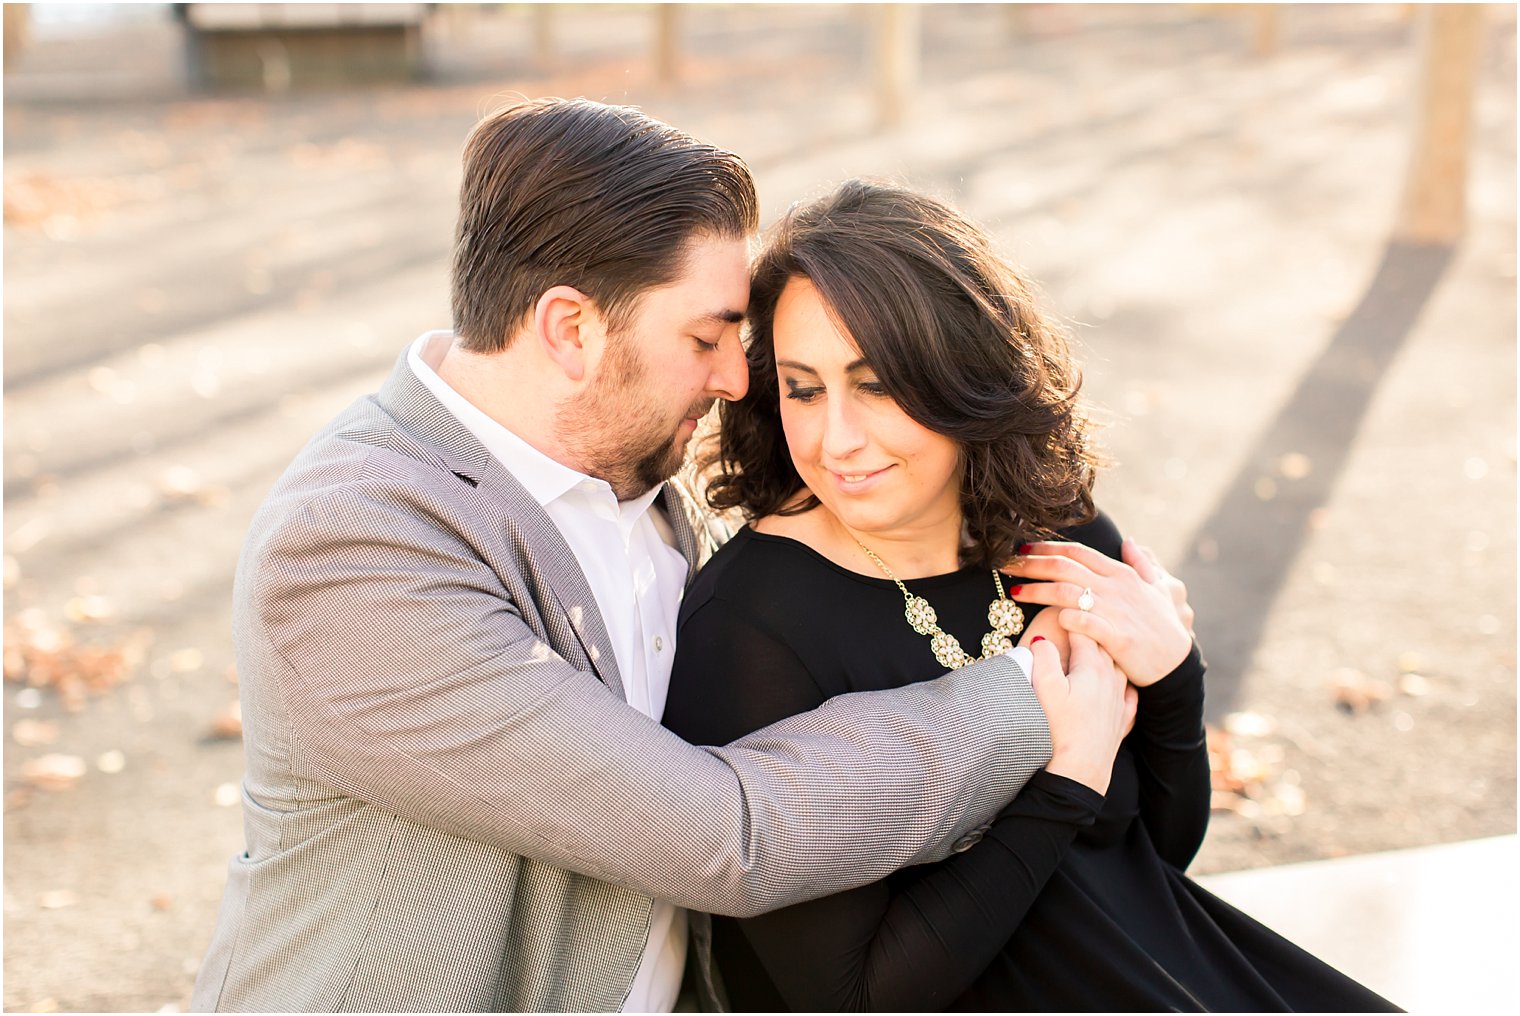 Gray suit and black dress for engagement photos